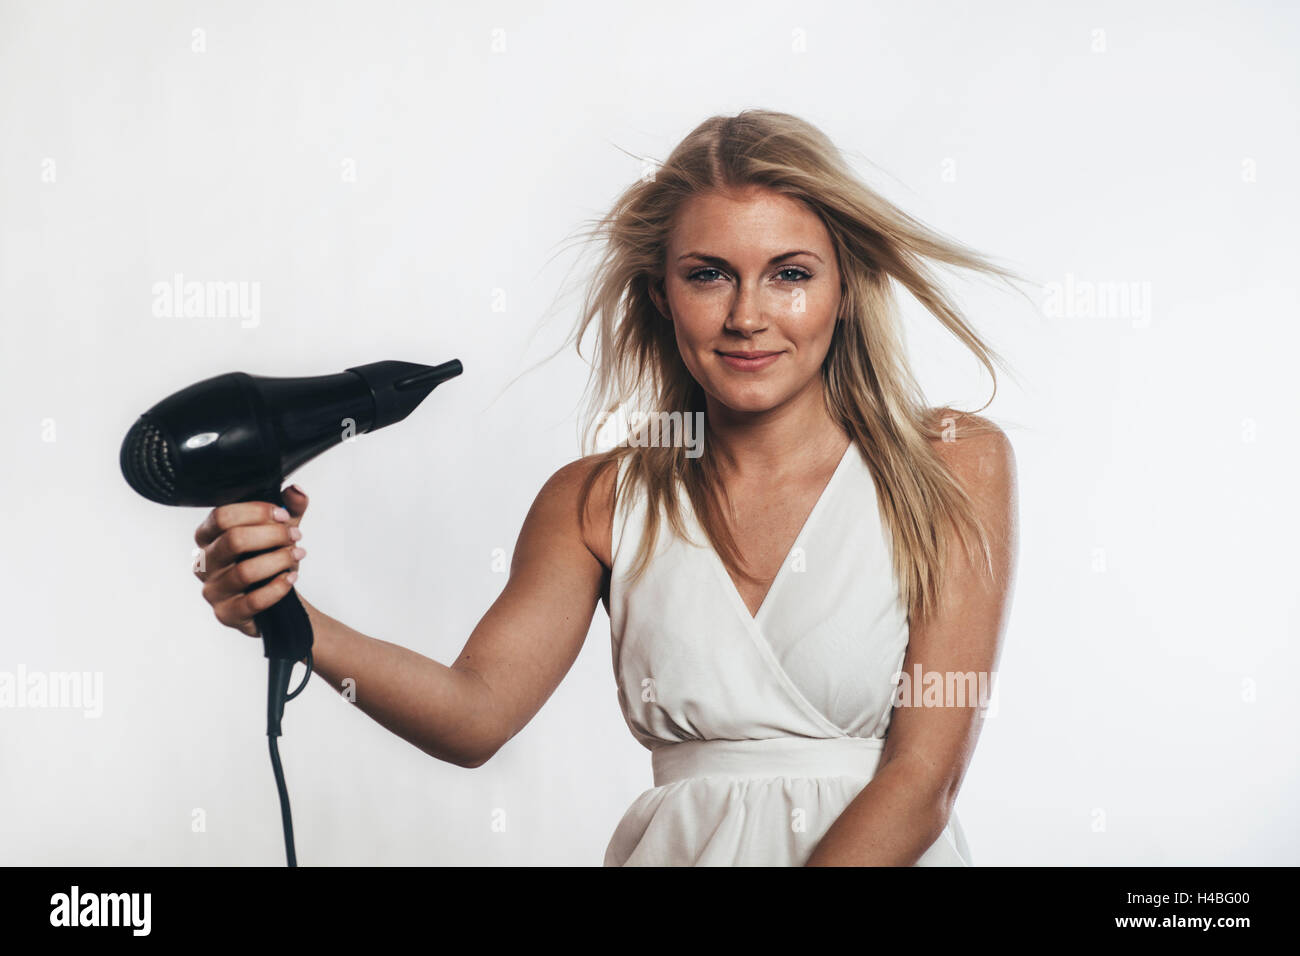 Woman blow-drying her hair Stock Photo